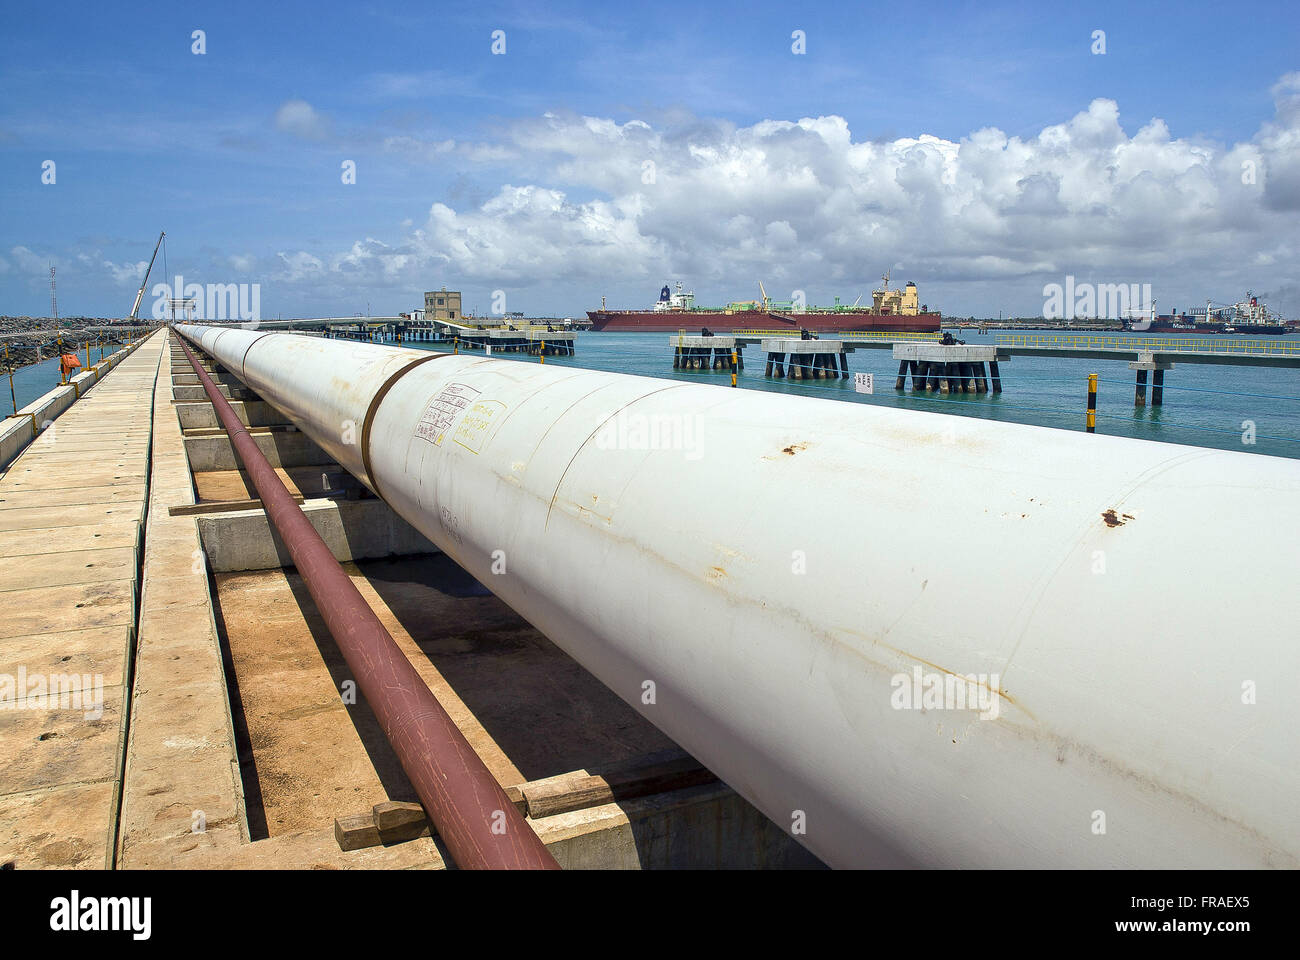 Oil terminal at the Port of Suape Stock Photo